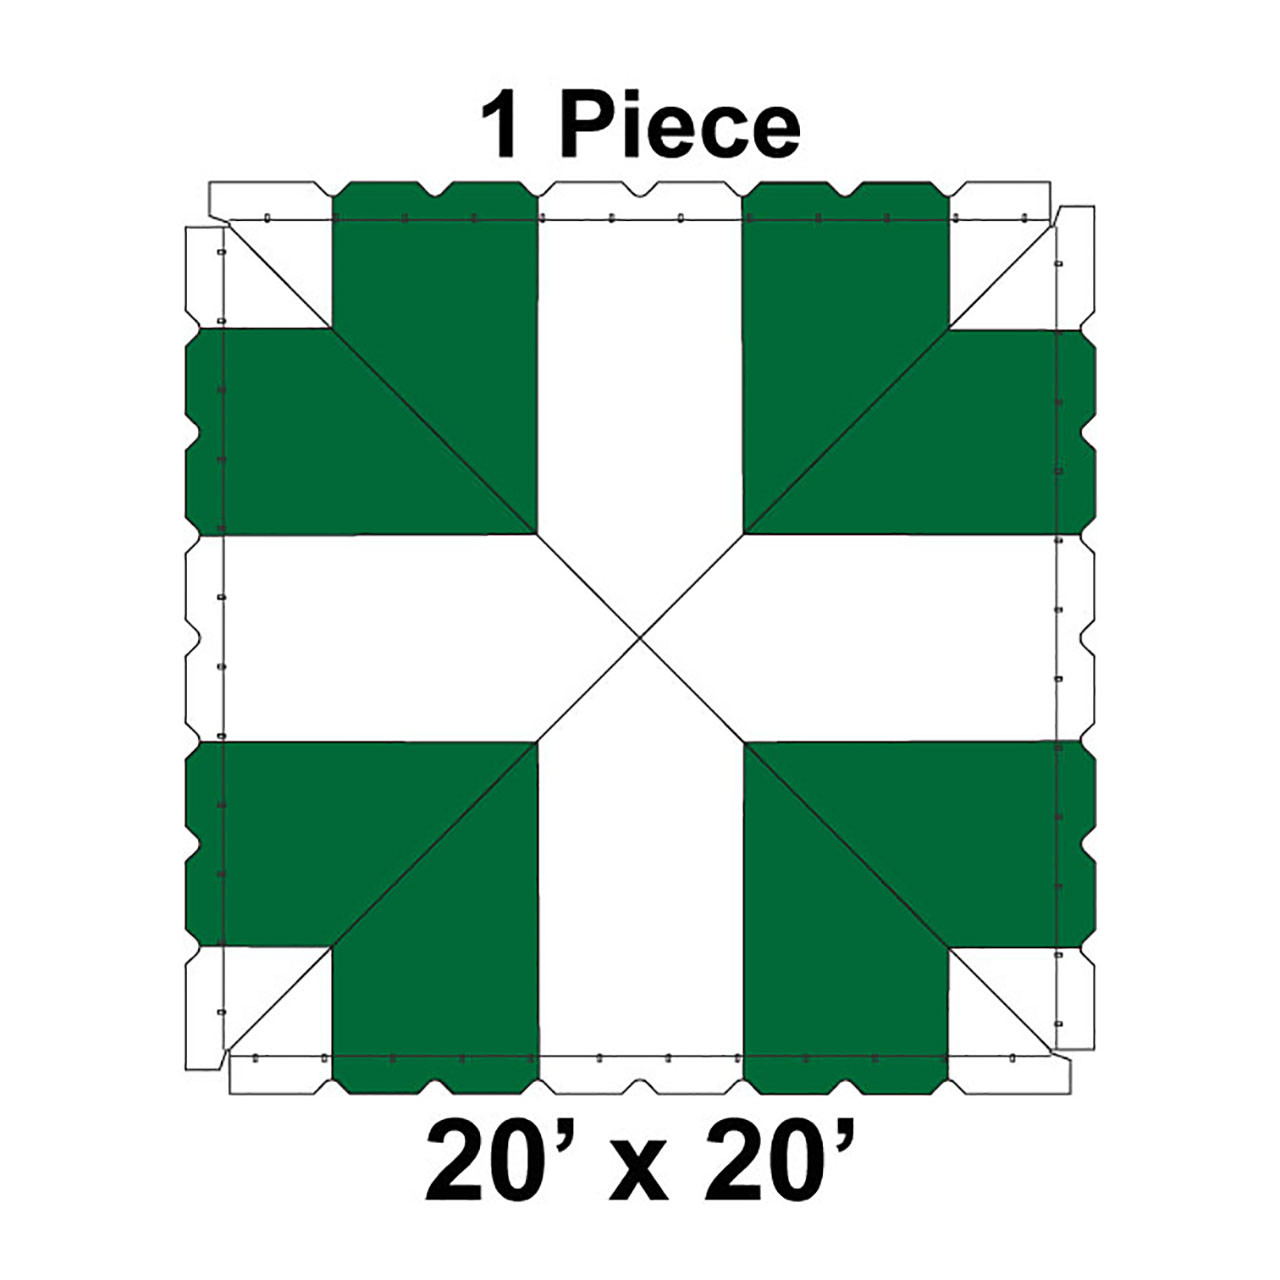 20' x 20' Classic Frame Tent, 1 Piece, 16 oz. Ratchet Top, White and Forest Green